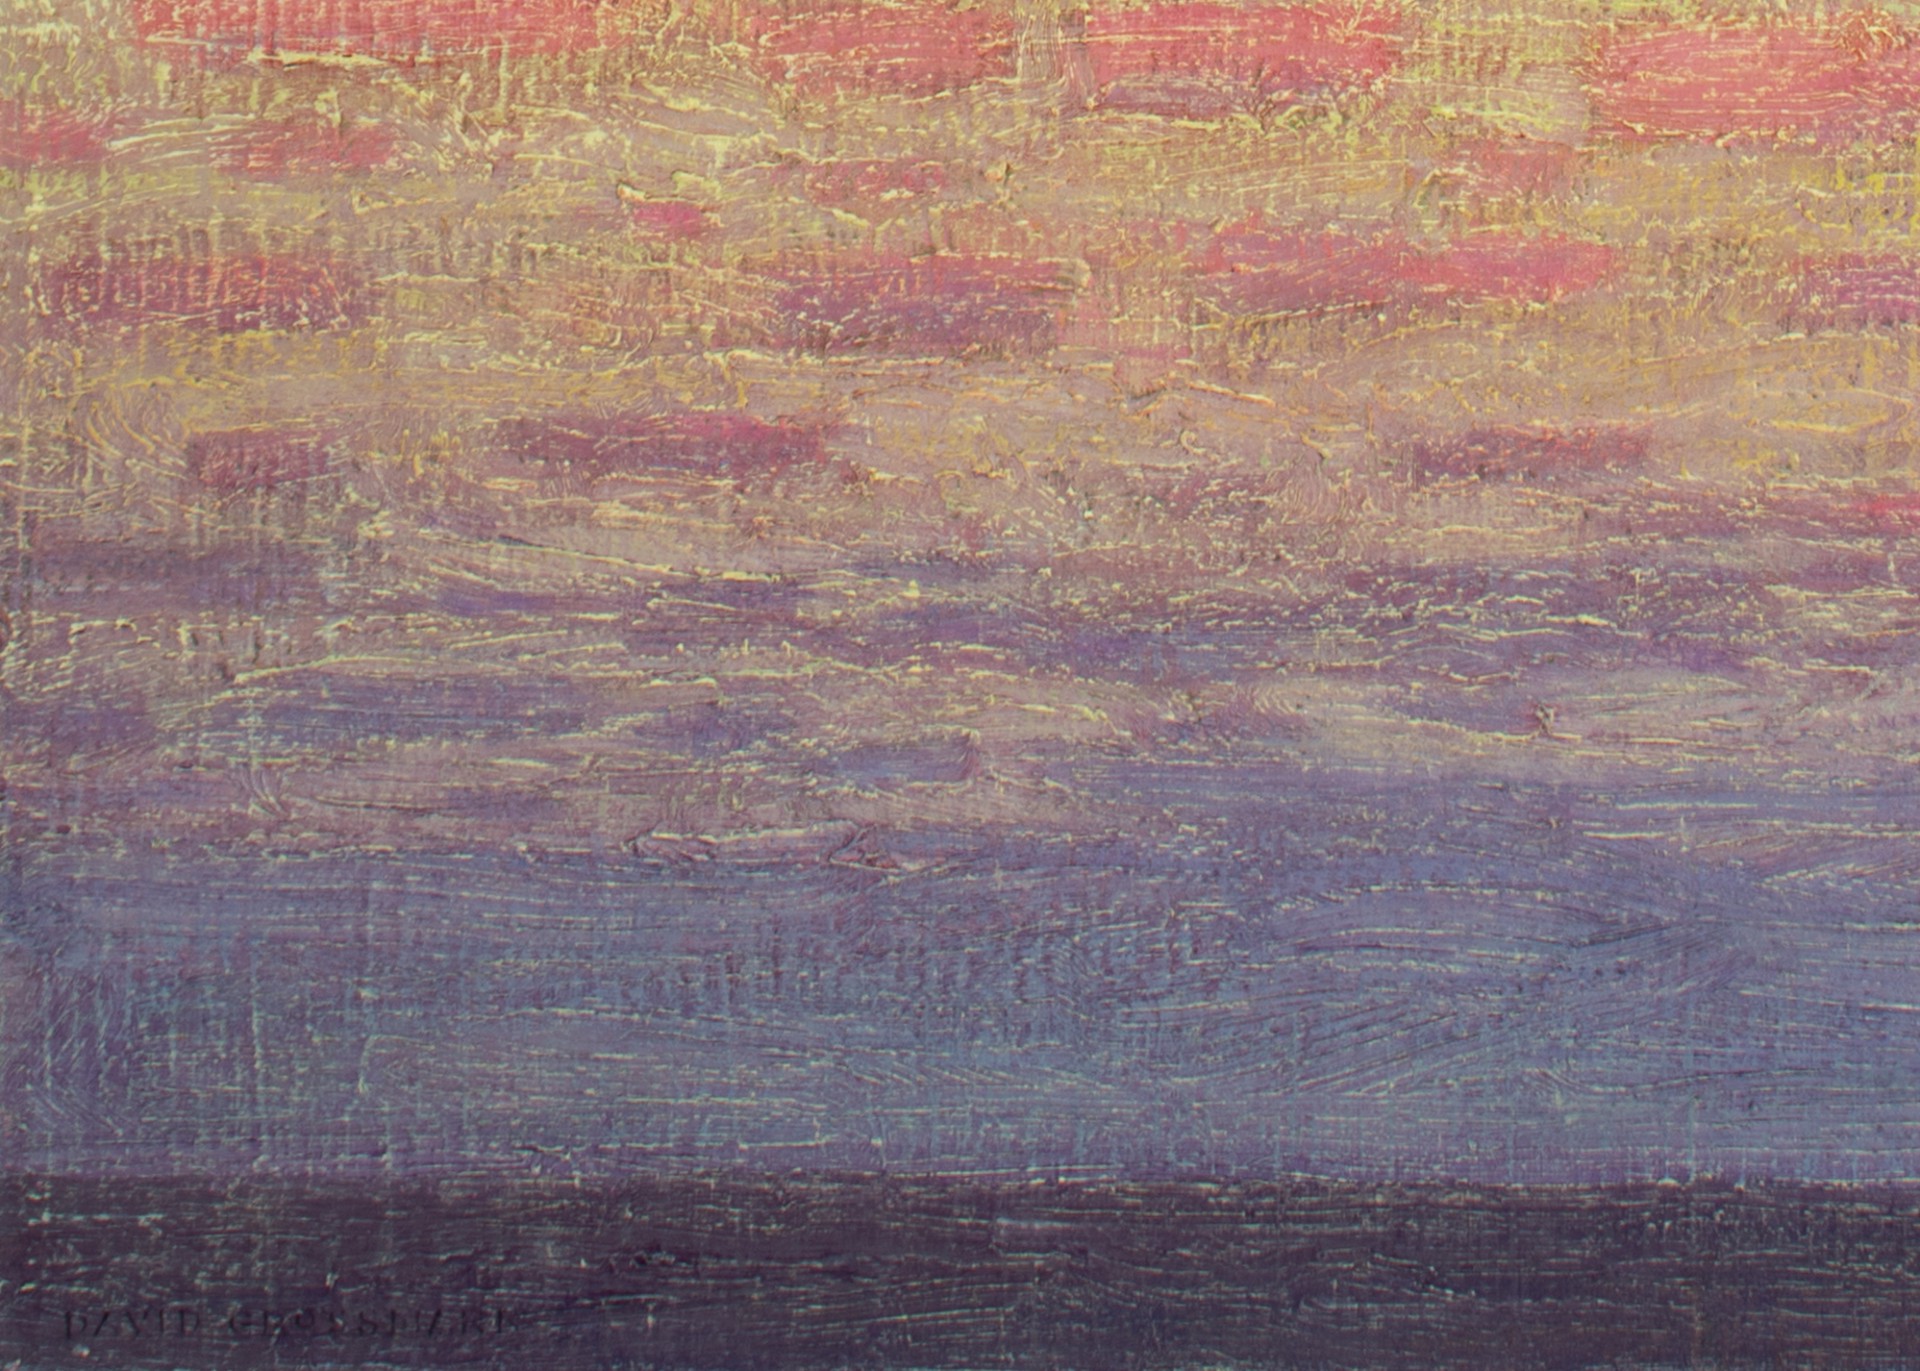 Sunset Clouds with Strands of Geese by David Grossmann